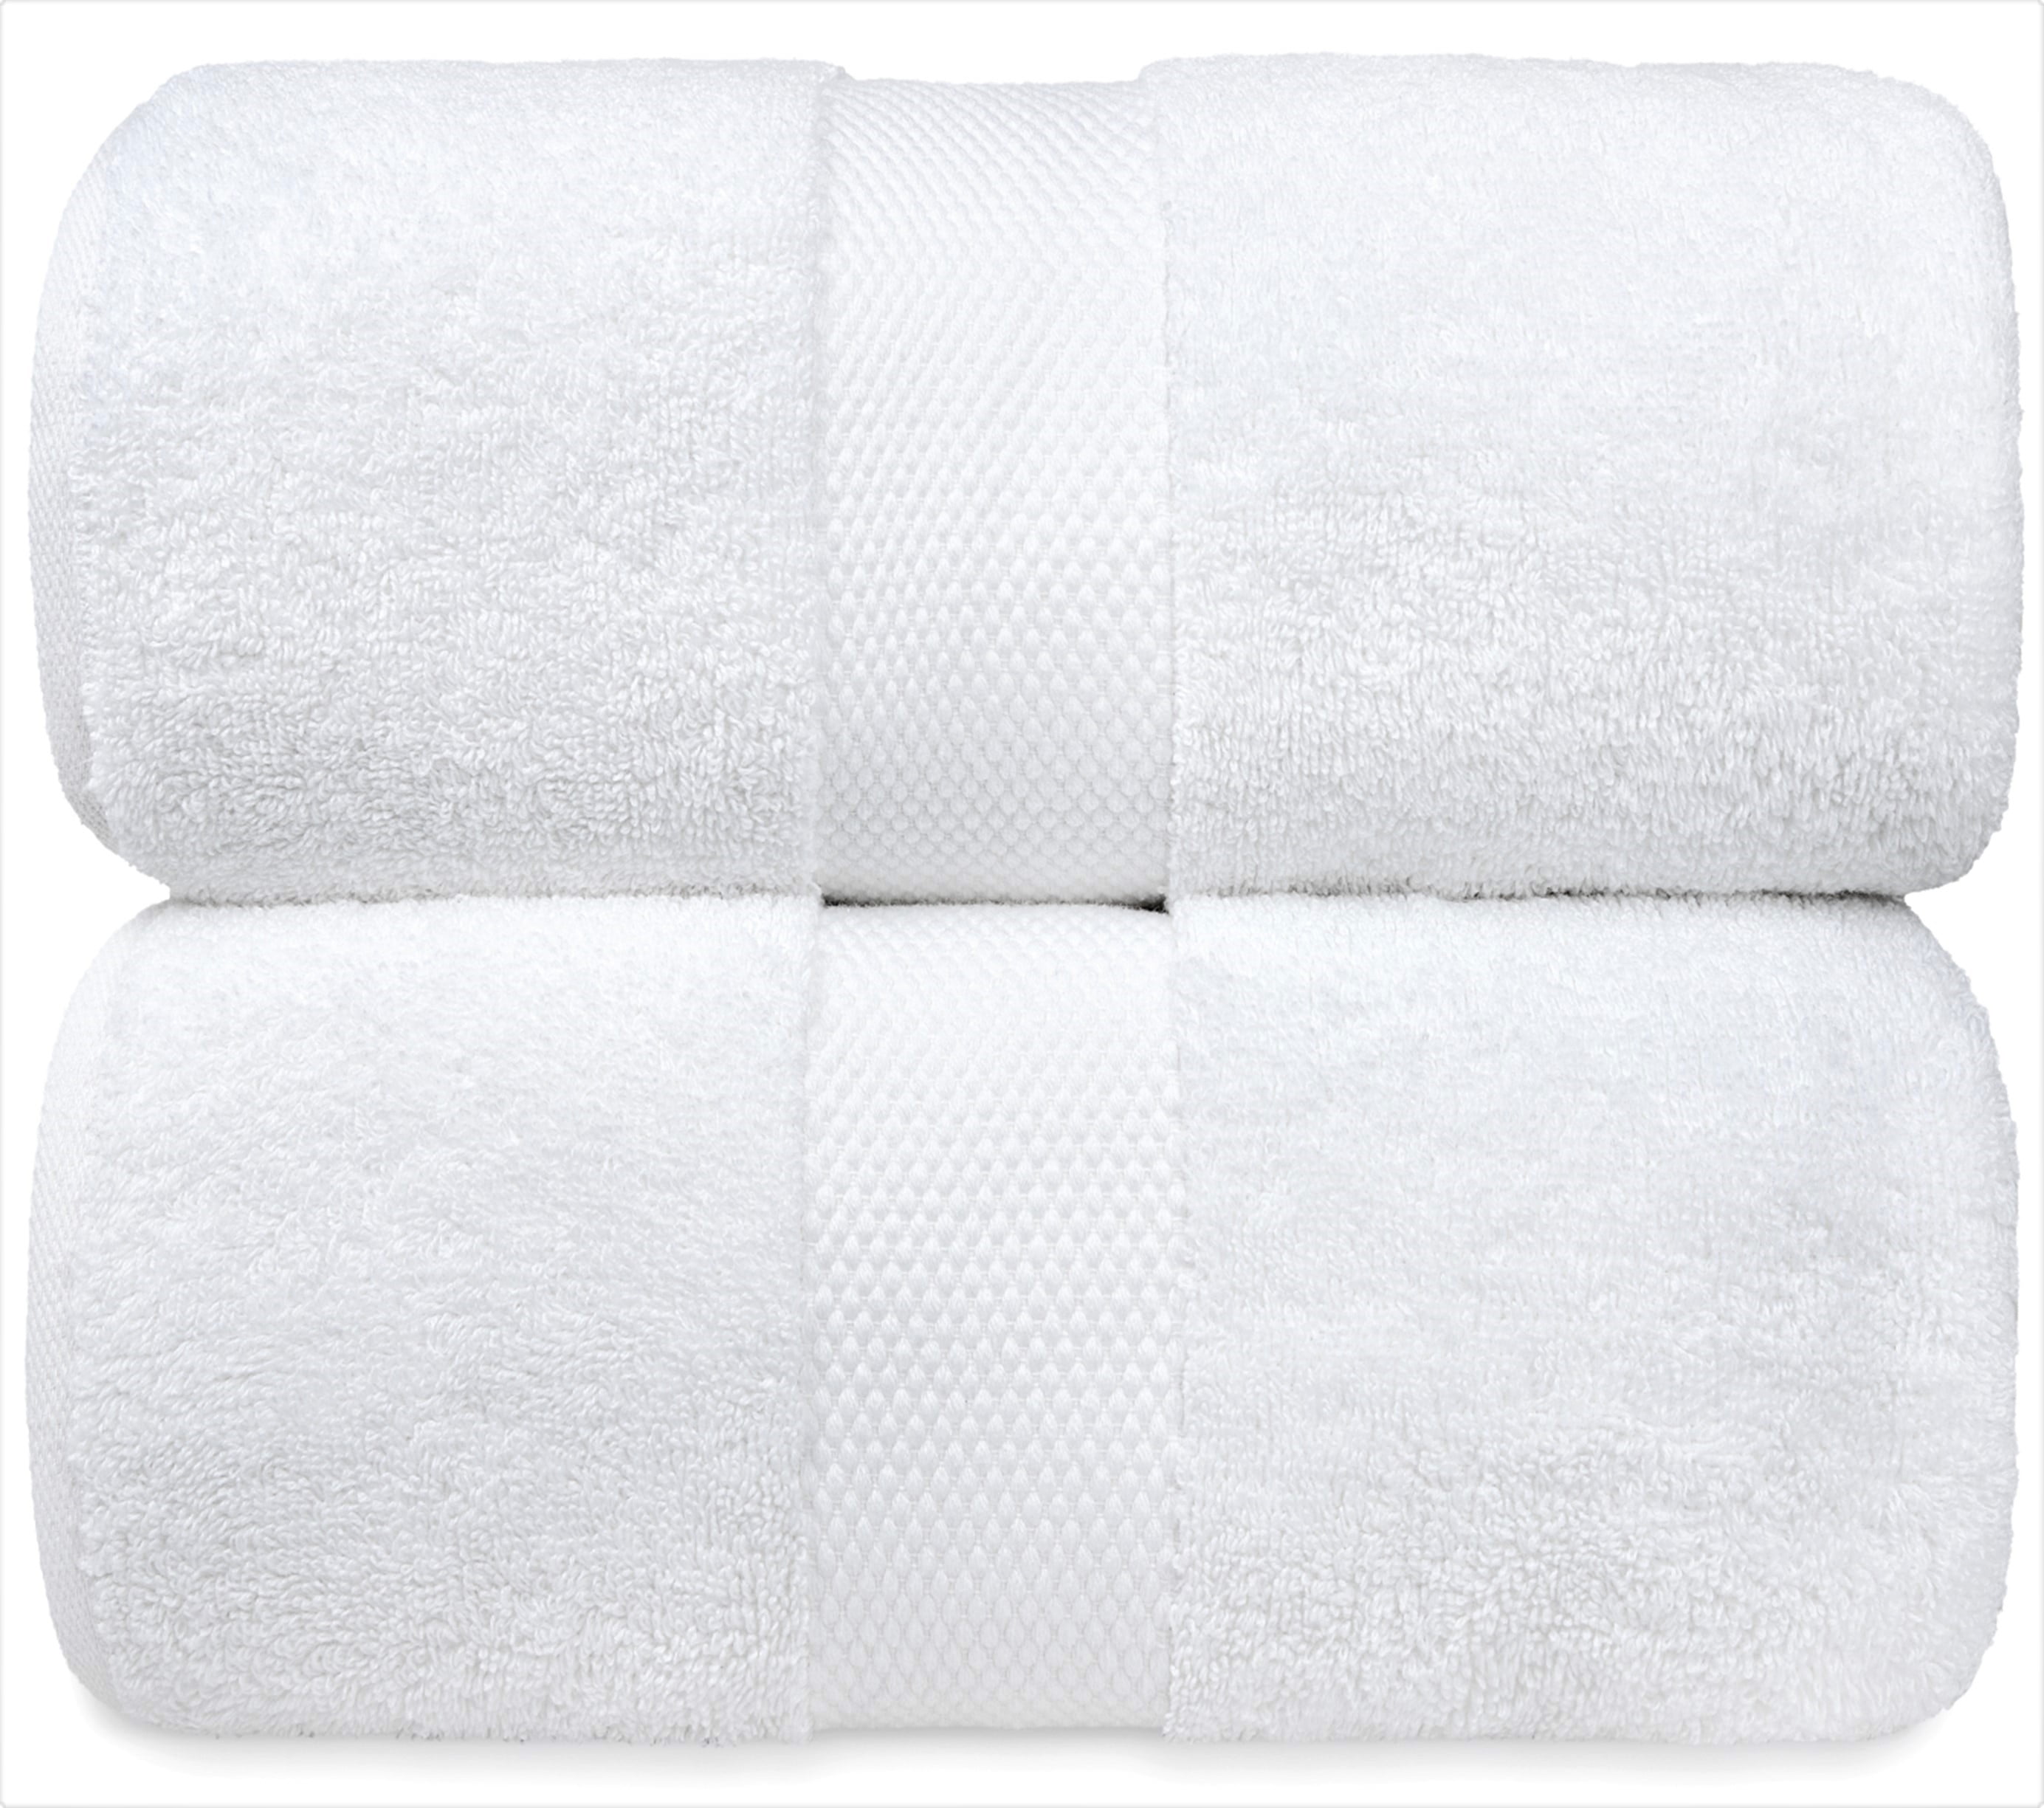 Luxury White Bath Towels Large Cotton Absorbent Hotel Towel 30x56 Inch 2-Pack 